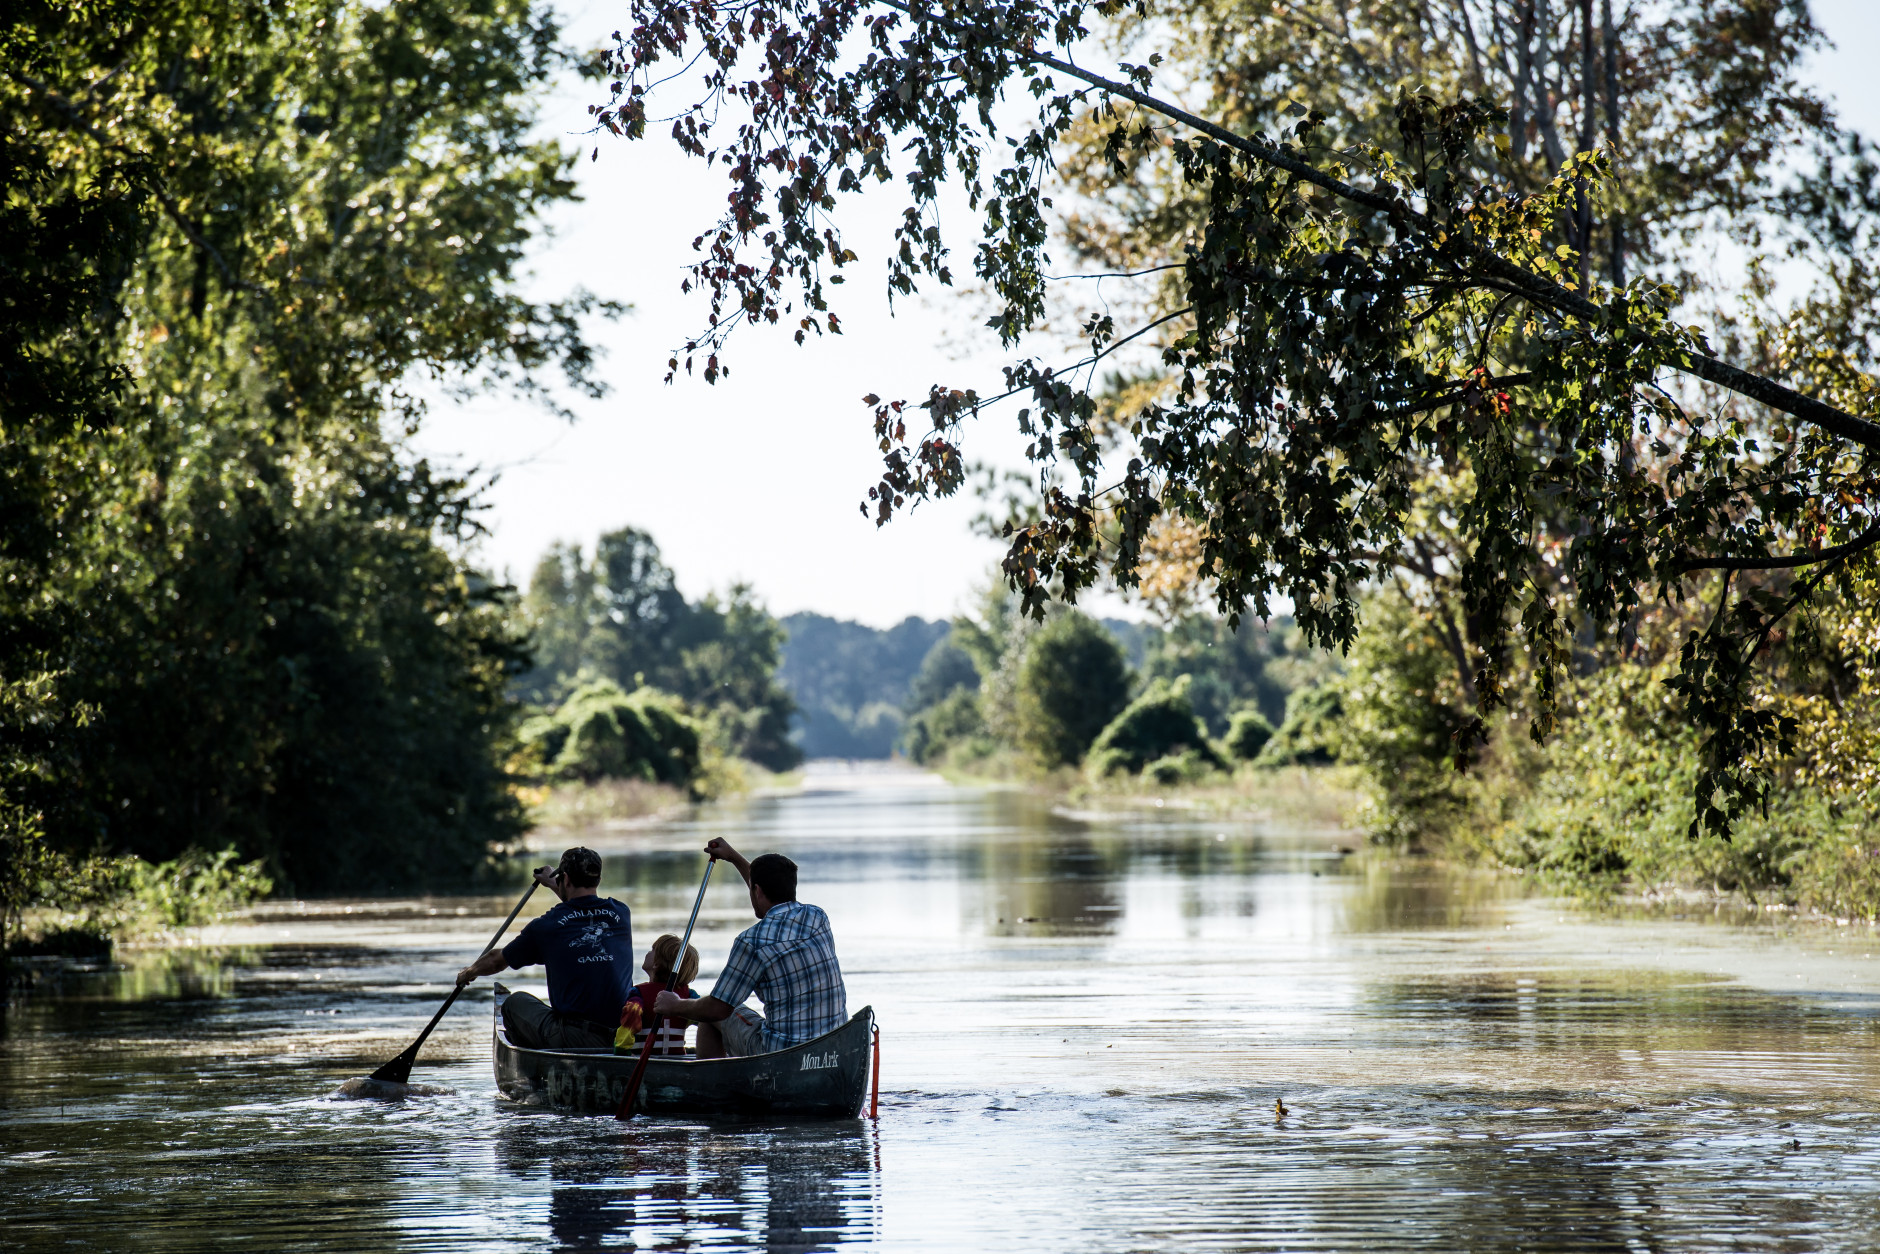 COLUMBIA, SC - OCTOBER 6:  People canoe down South Beltline Road October 6, 2015 in Columbia, South Carolina. The state of South Carolina experienced record rainfall amounts over the weekend and officials expect the costs to be in the billions of dollars. (Photo by Sean Rayford/Getty Images)